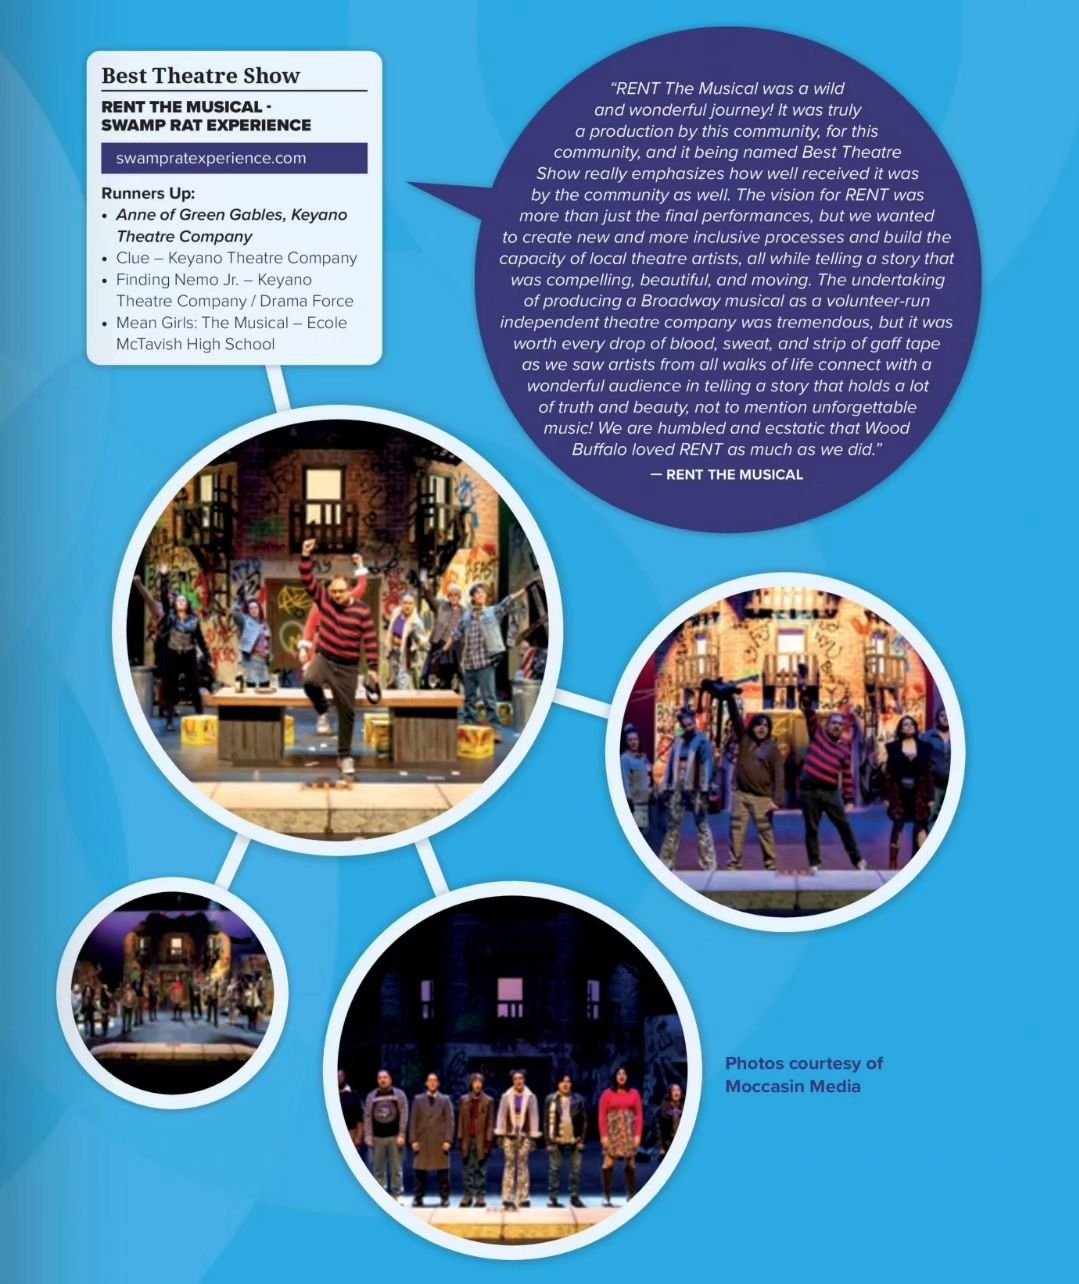 &quot;RENT was truly a production by this community, for this community, and being named Best Theatre Show really emphasizes how well received it was by the community. [...] We saw artists from all walks of life connect with a wonderful audience in t